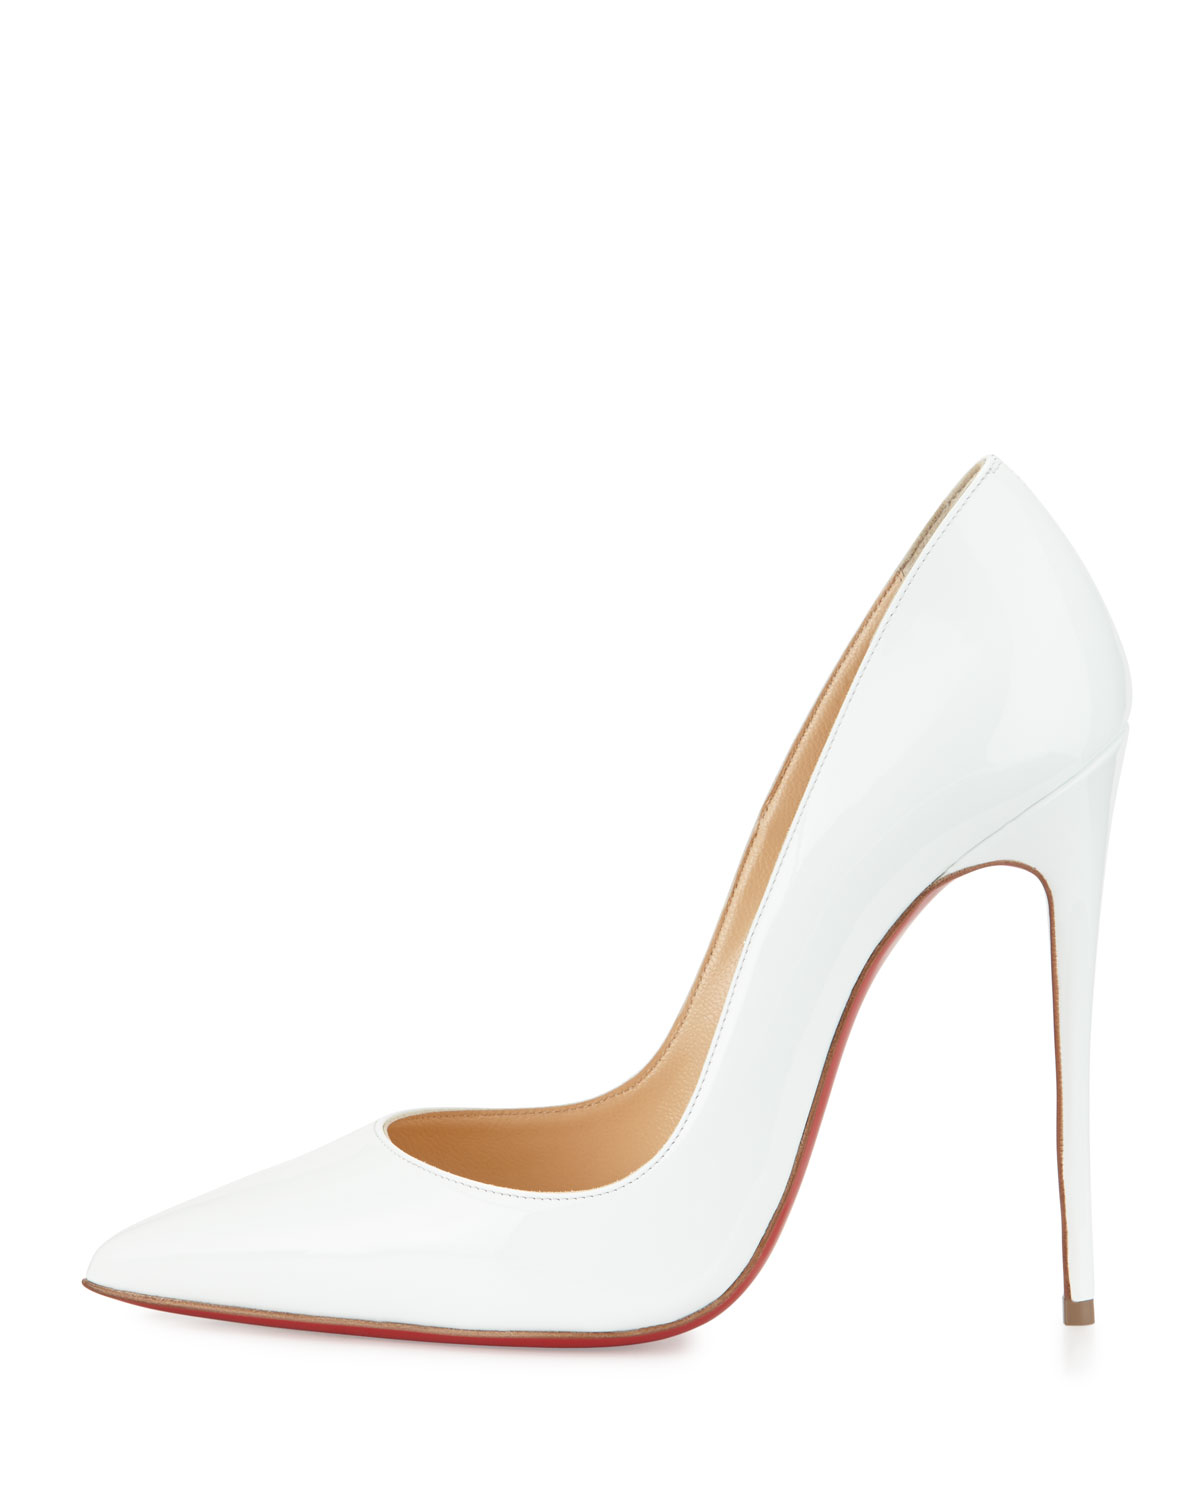 Christian louboutin So Kate Patent 120mm Red Sole Pump in White | Lyst  